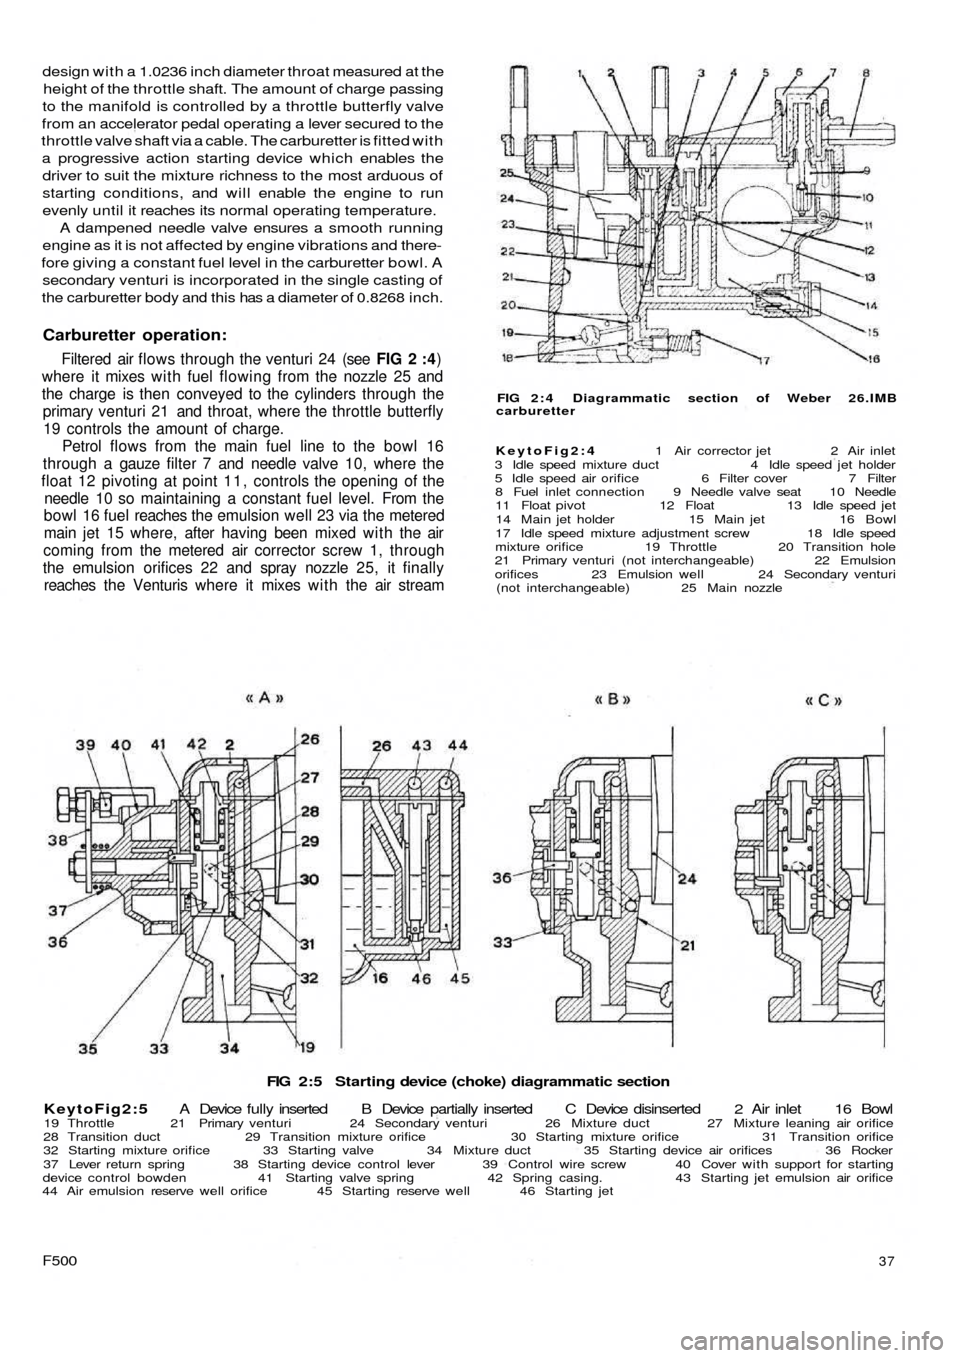 FIAT 500 1957 1.G Owners Manual FIG 2:5  Starting device (choke) diagrammatic section
KeytoFig2:5 A  Device  fully inserted  B  Device  partially  inserted  C  Device  disinserted  2  Air  inlet 16 Bowl
19 Throttle  21 Primary ventu